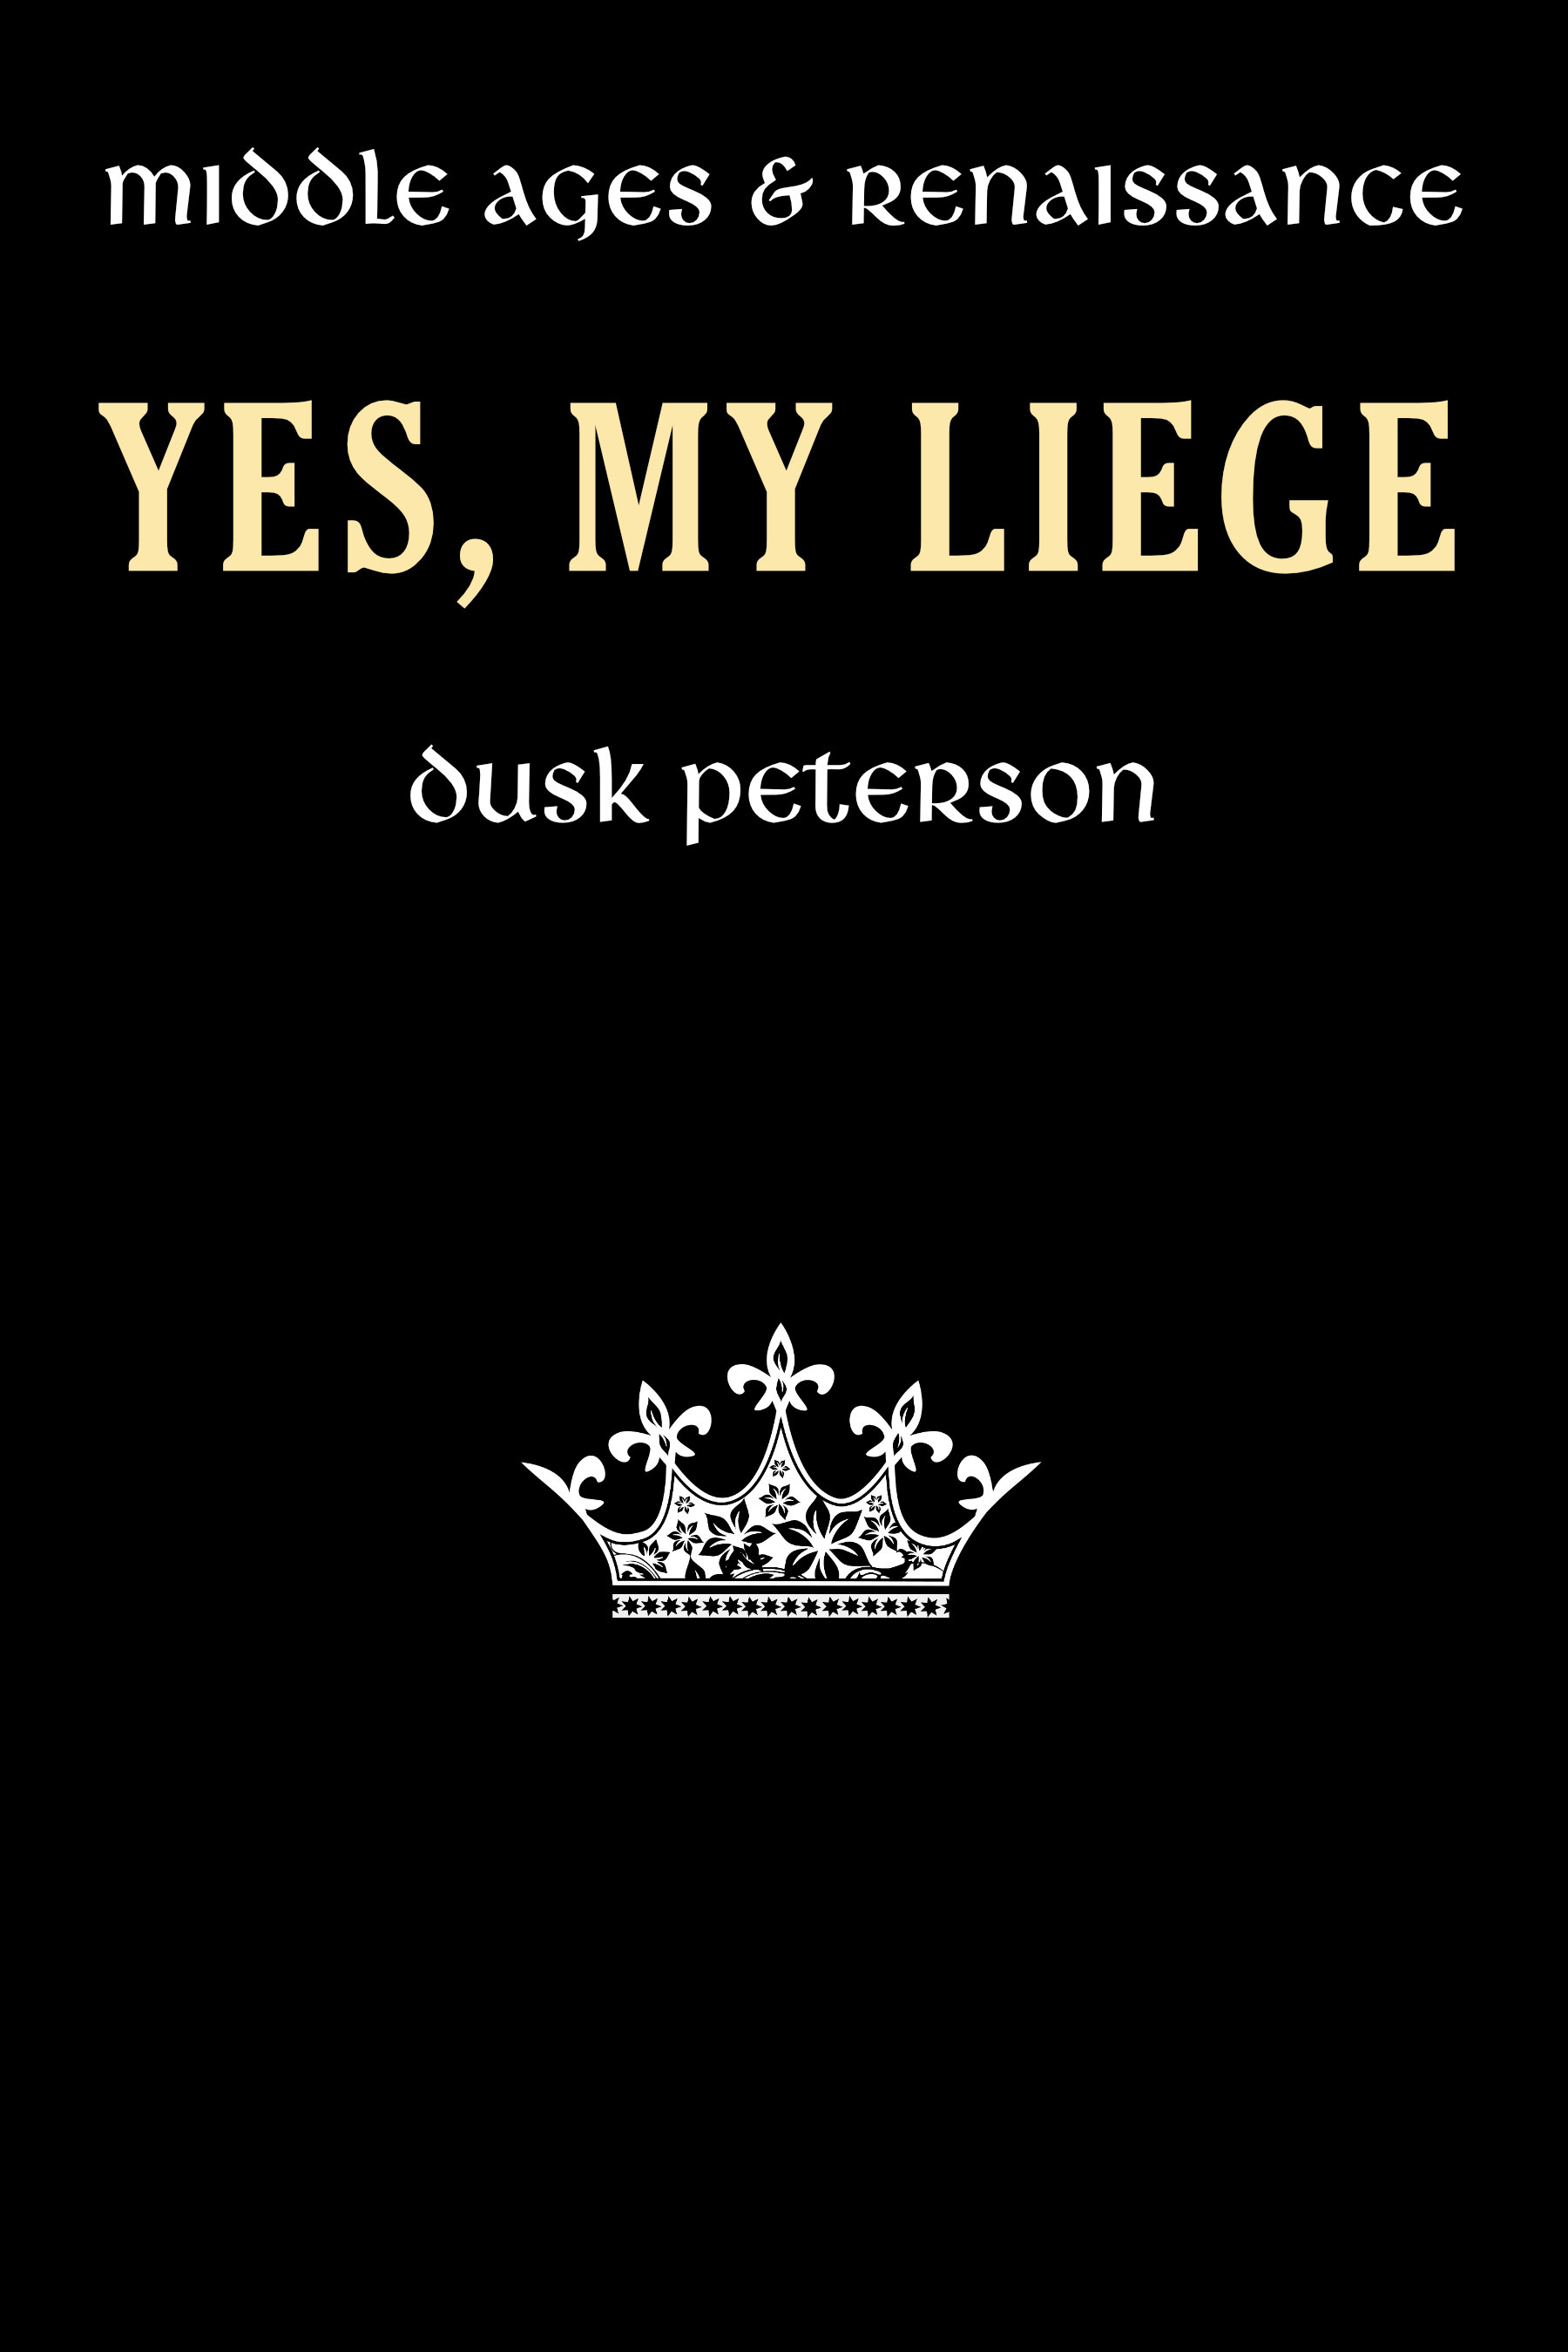 Yes, My Liege: Middle Ages & Renaissance